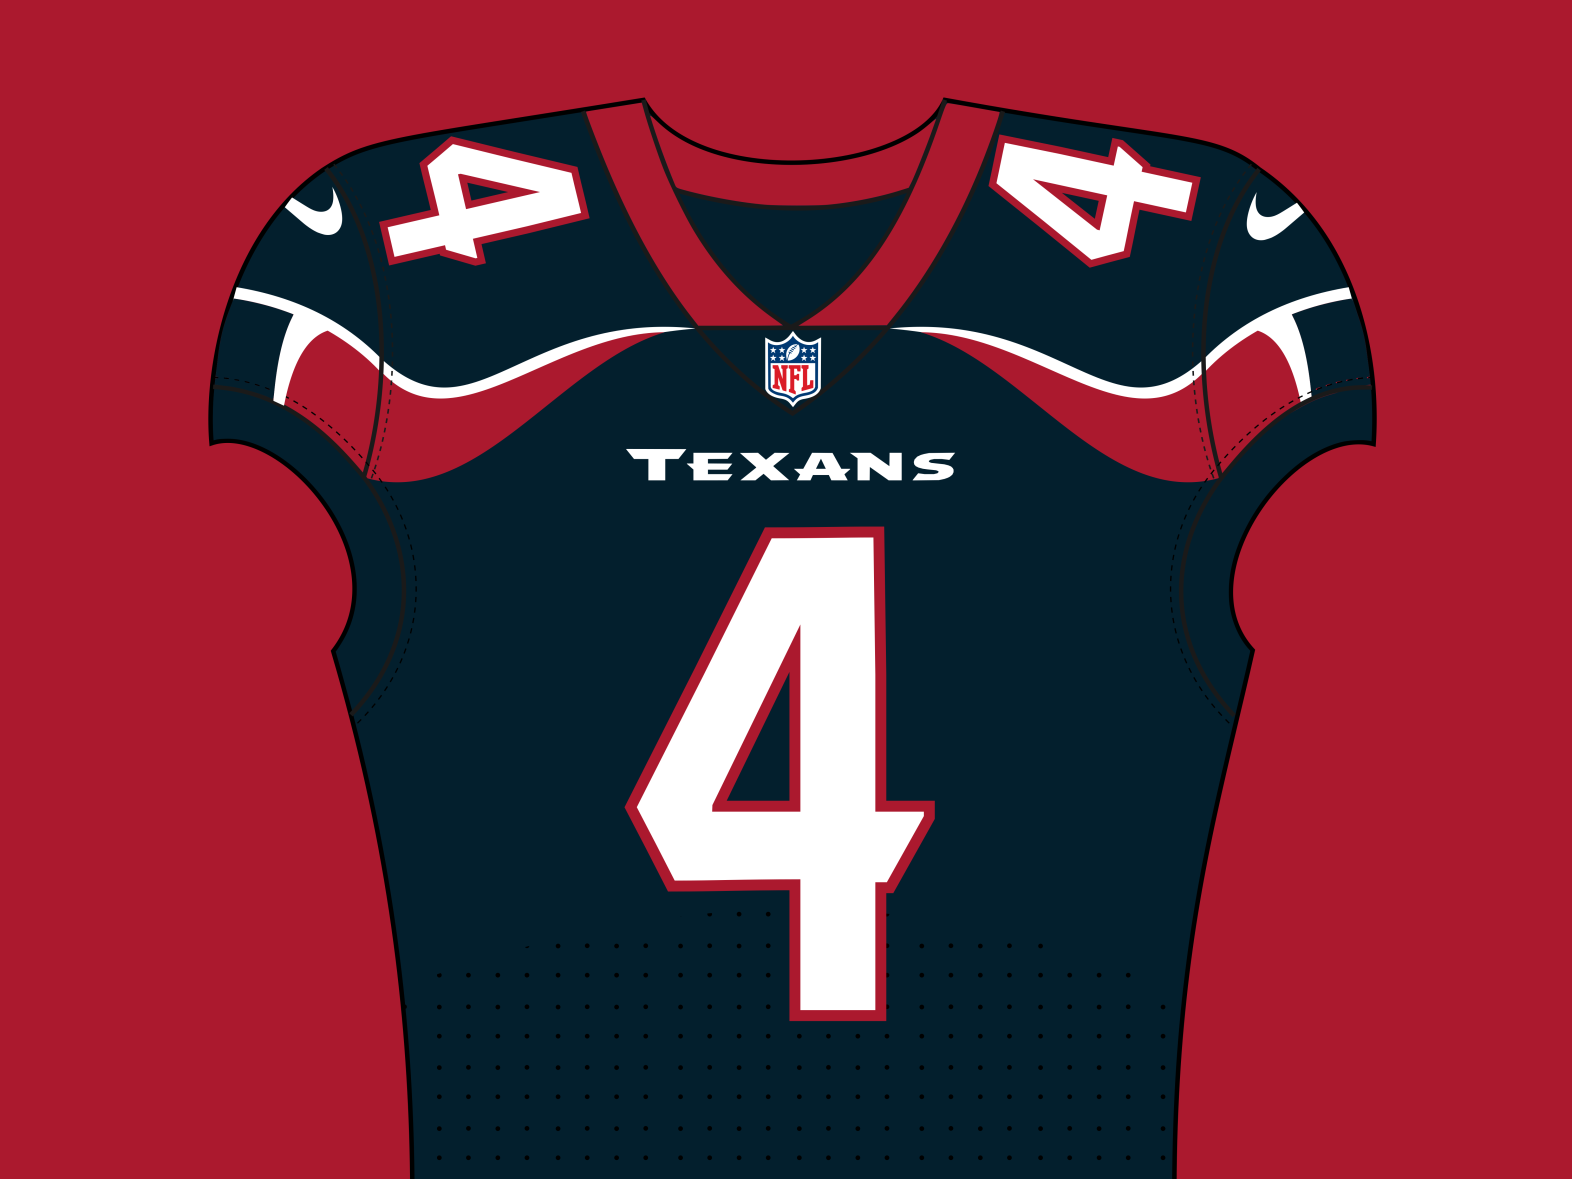 Texans logo and jersey redesign : r/Texans